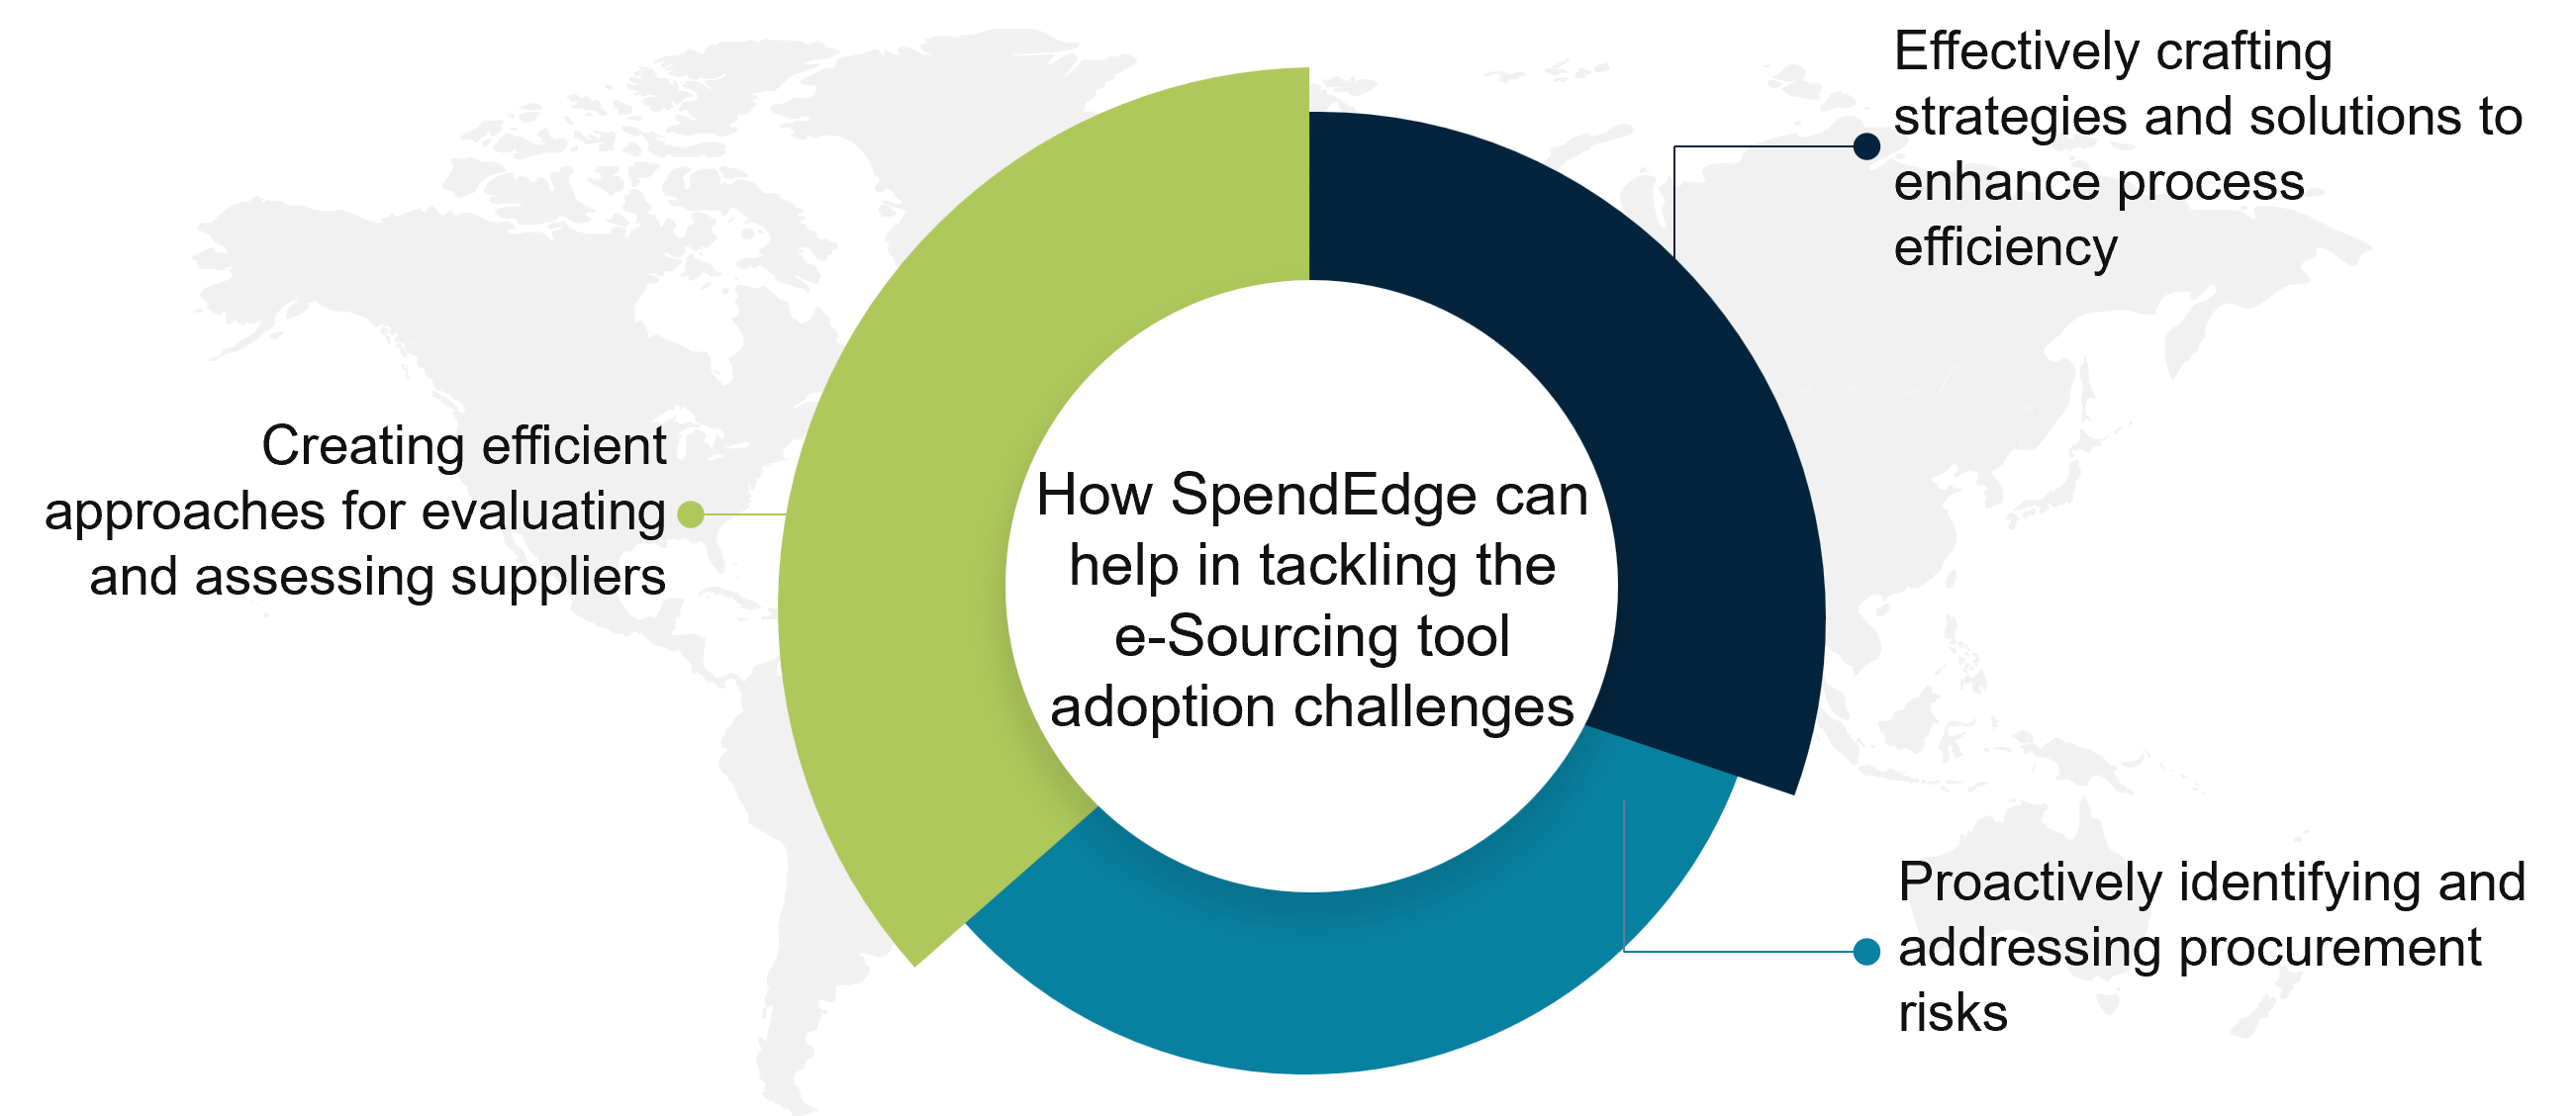 How SpendEdge can help in tackling the e-Sourcing tool adoption challenges